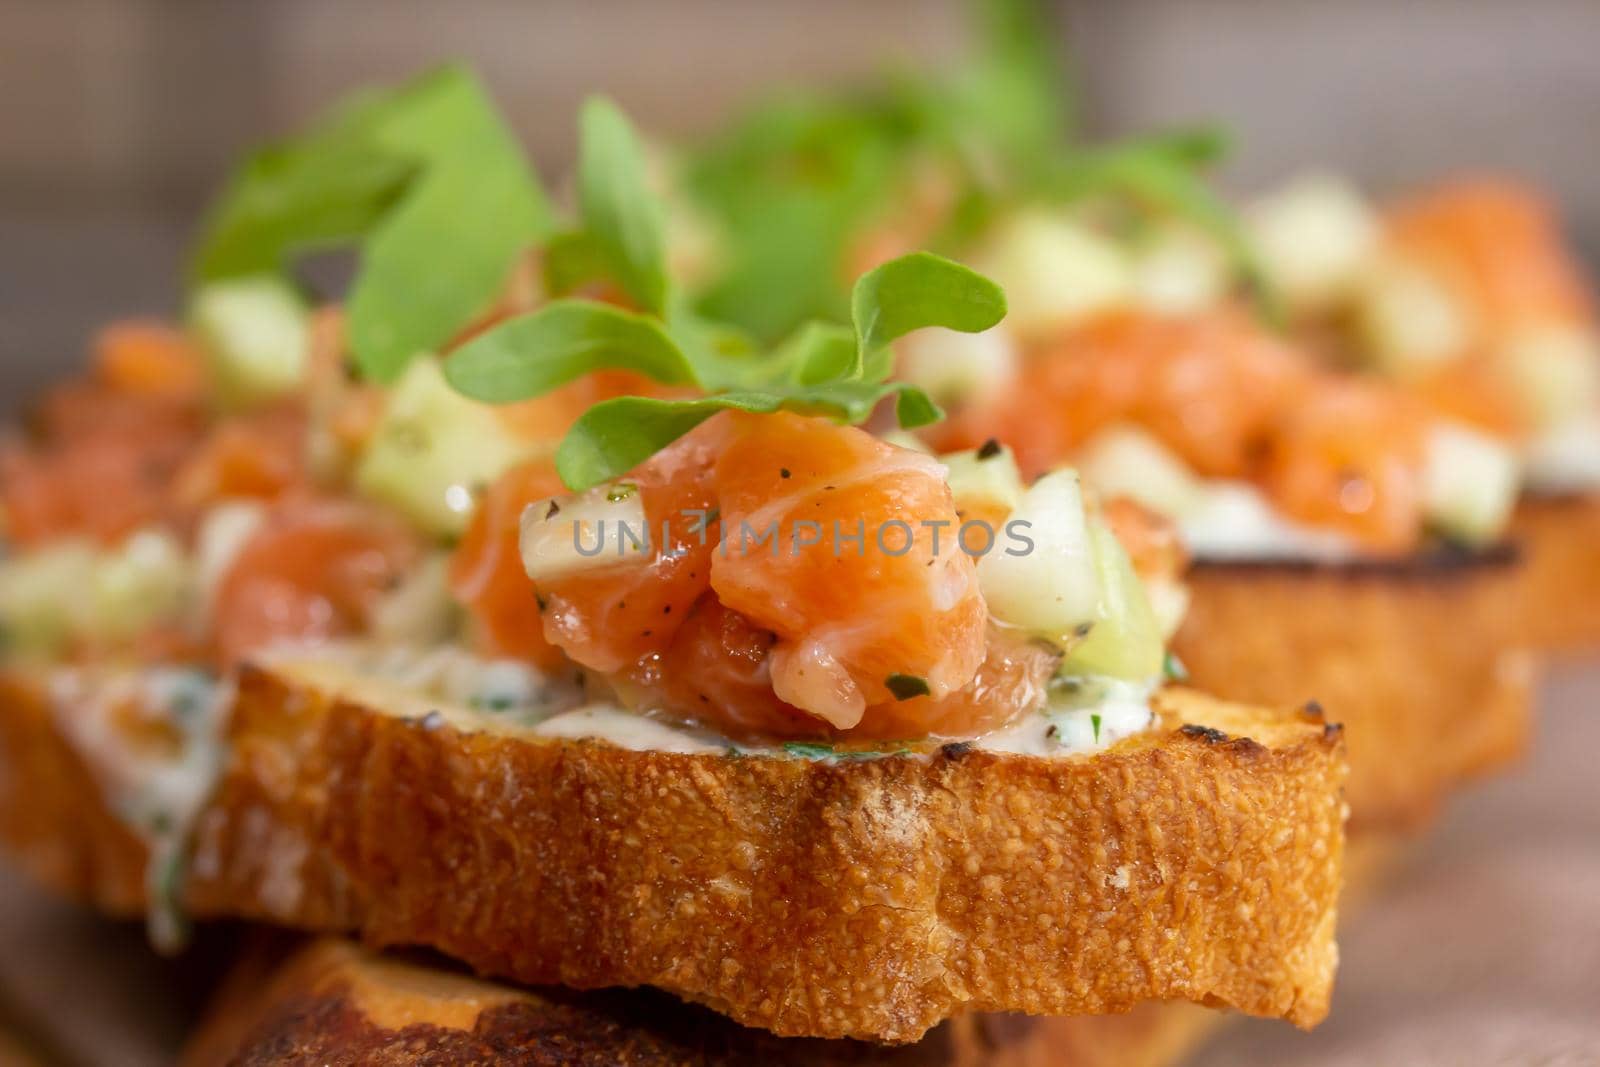 dry aged smoked salmon on the slices of bread and cream cheese sandwiches with cherry tomatoes and rocket salad by Milanchikov